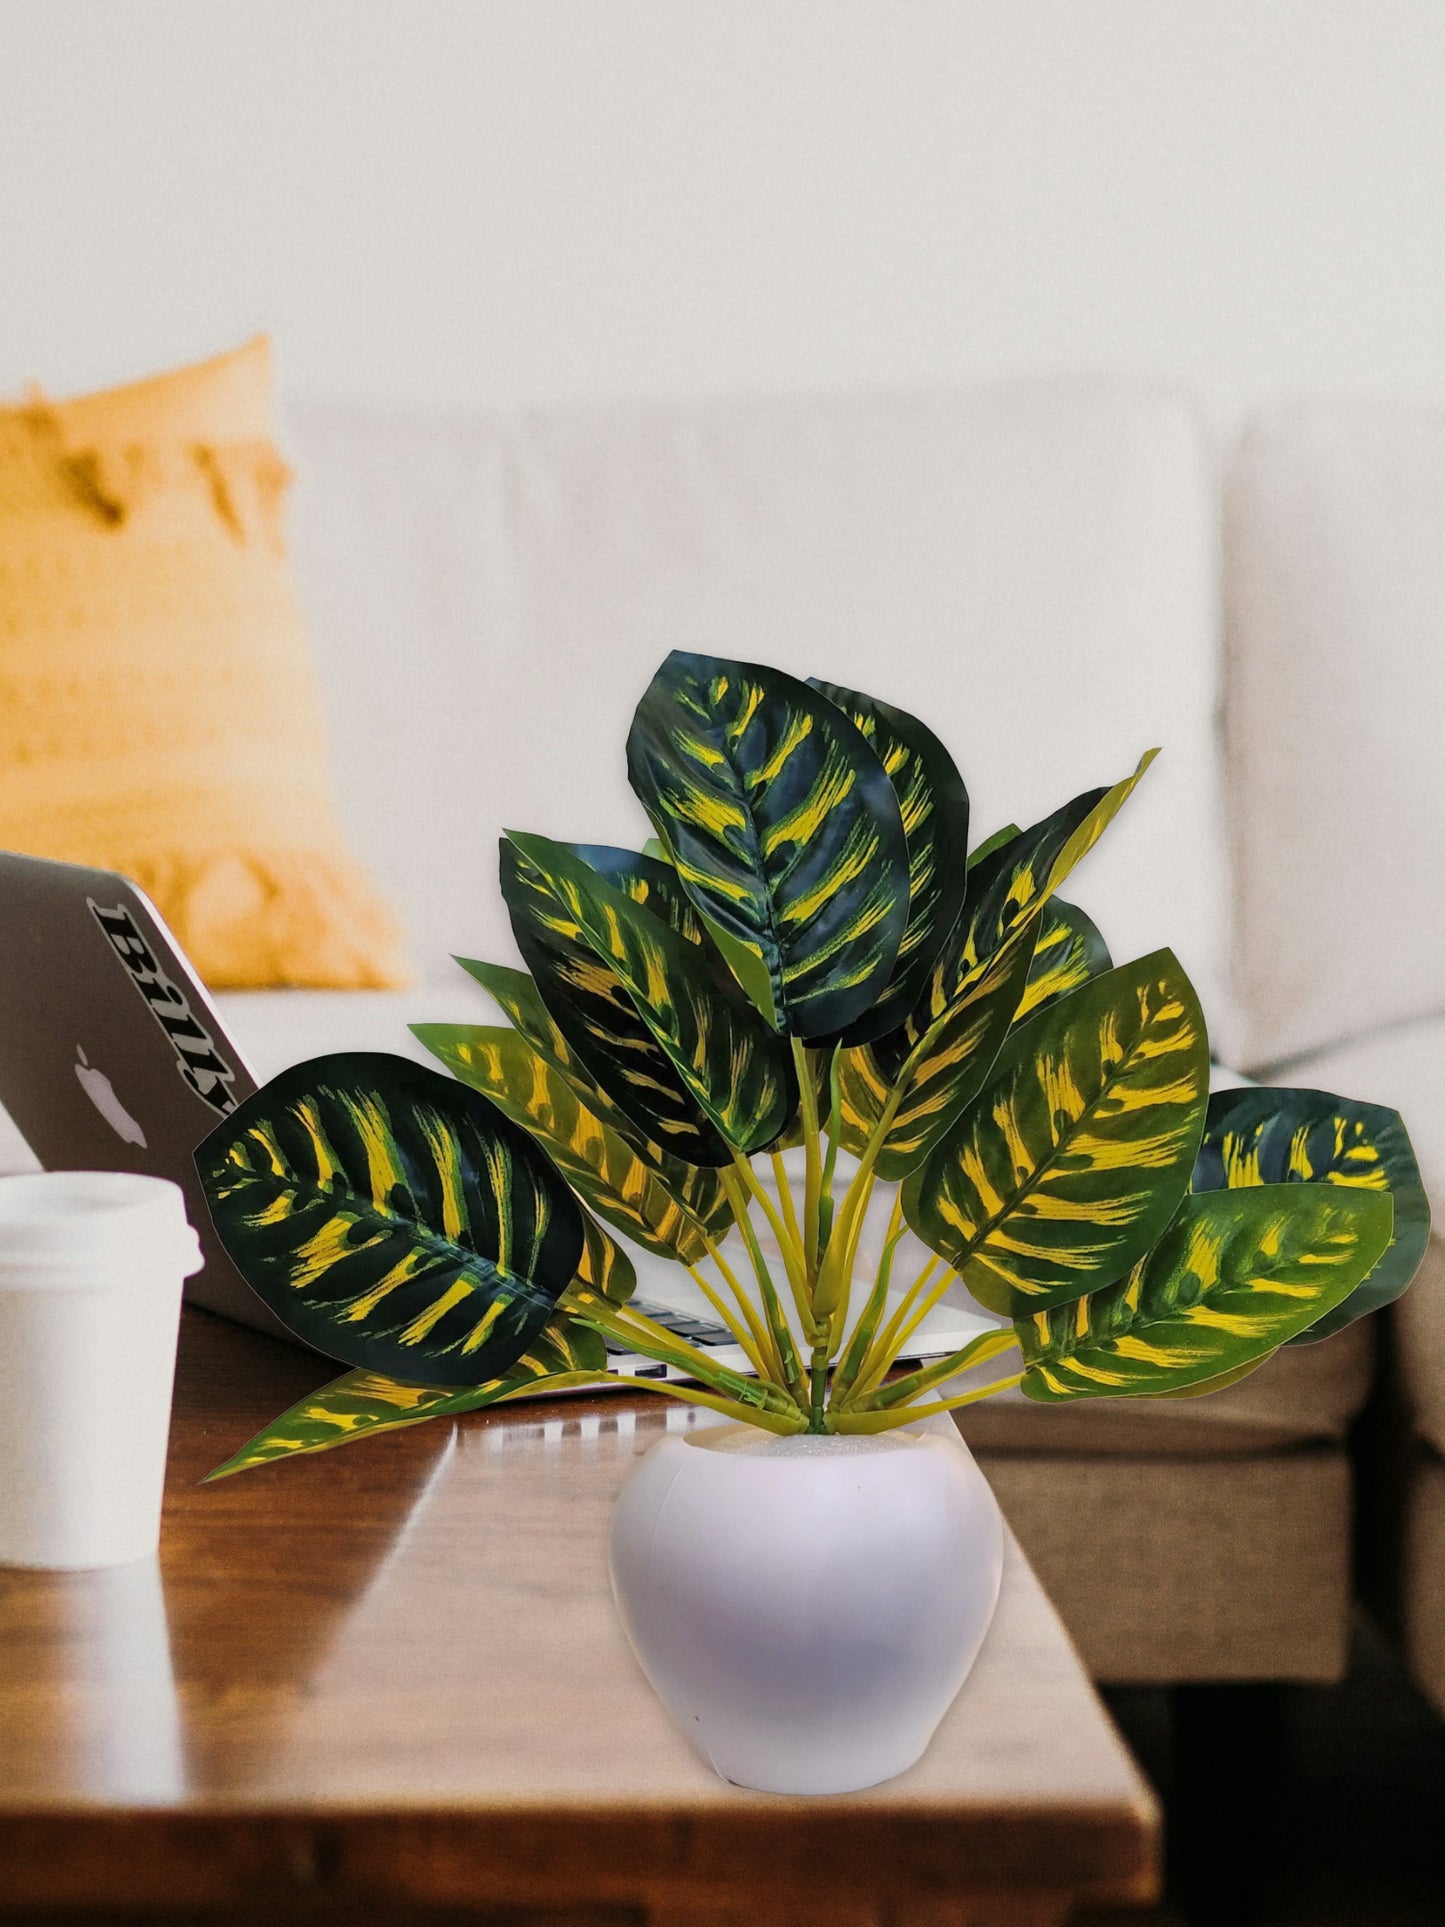 Blooming Beauty: Artificial Plant in Stylish Pot for Effortless Home Decor. Artificial Leaves with Pot Plants for Home Decoration, Leaves Bunch Flowers with Pot Office Decor, Craft and DIY, Combo, Yellow green, triangular shape leaves